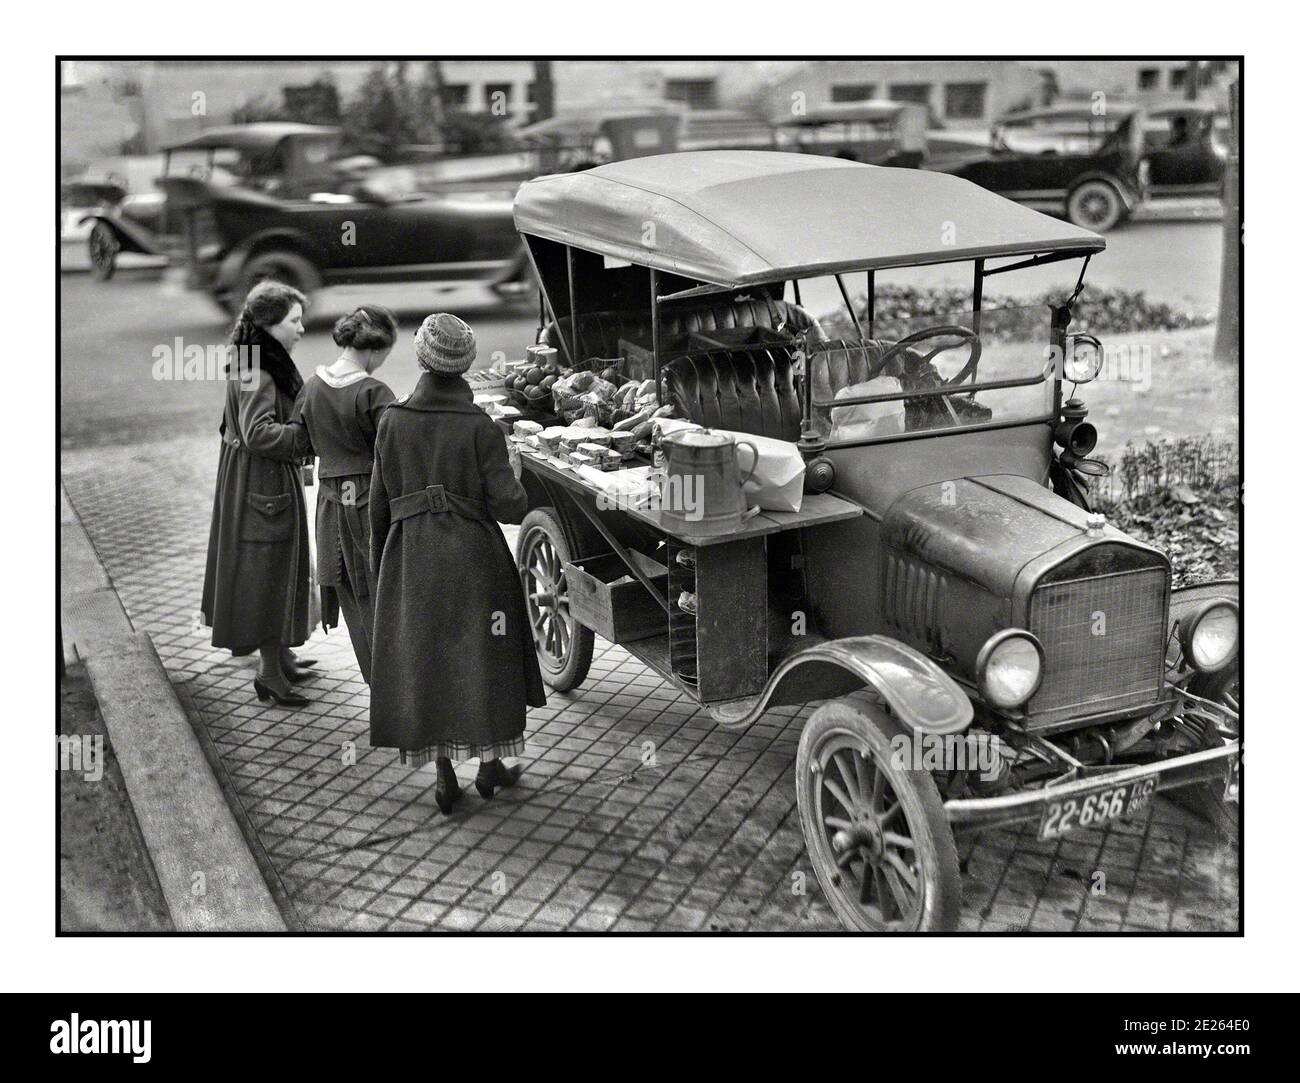 1919 Model T Ford used as a vendor fast food outlet by an enterprising entrepreneur Washington, D.C., in 1919. “Street lunch vendor.” A Ford Model T adapted to a mobile fast food sandwich-vending machine. 1900's USA Stock Photo